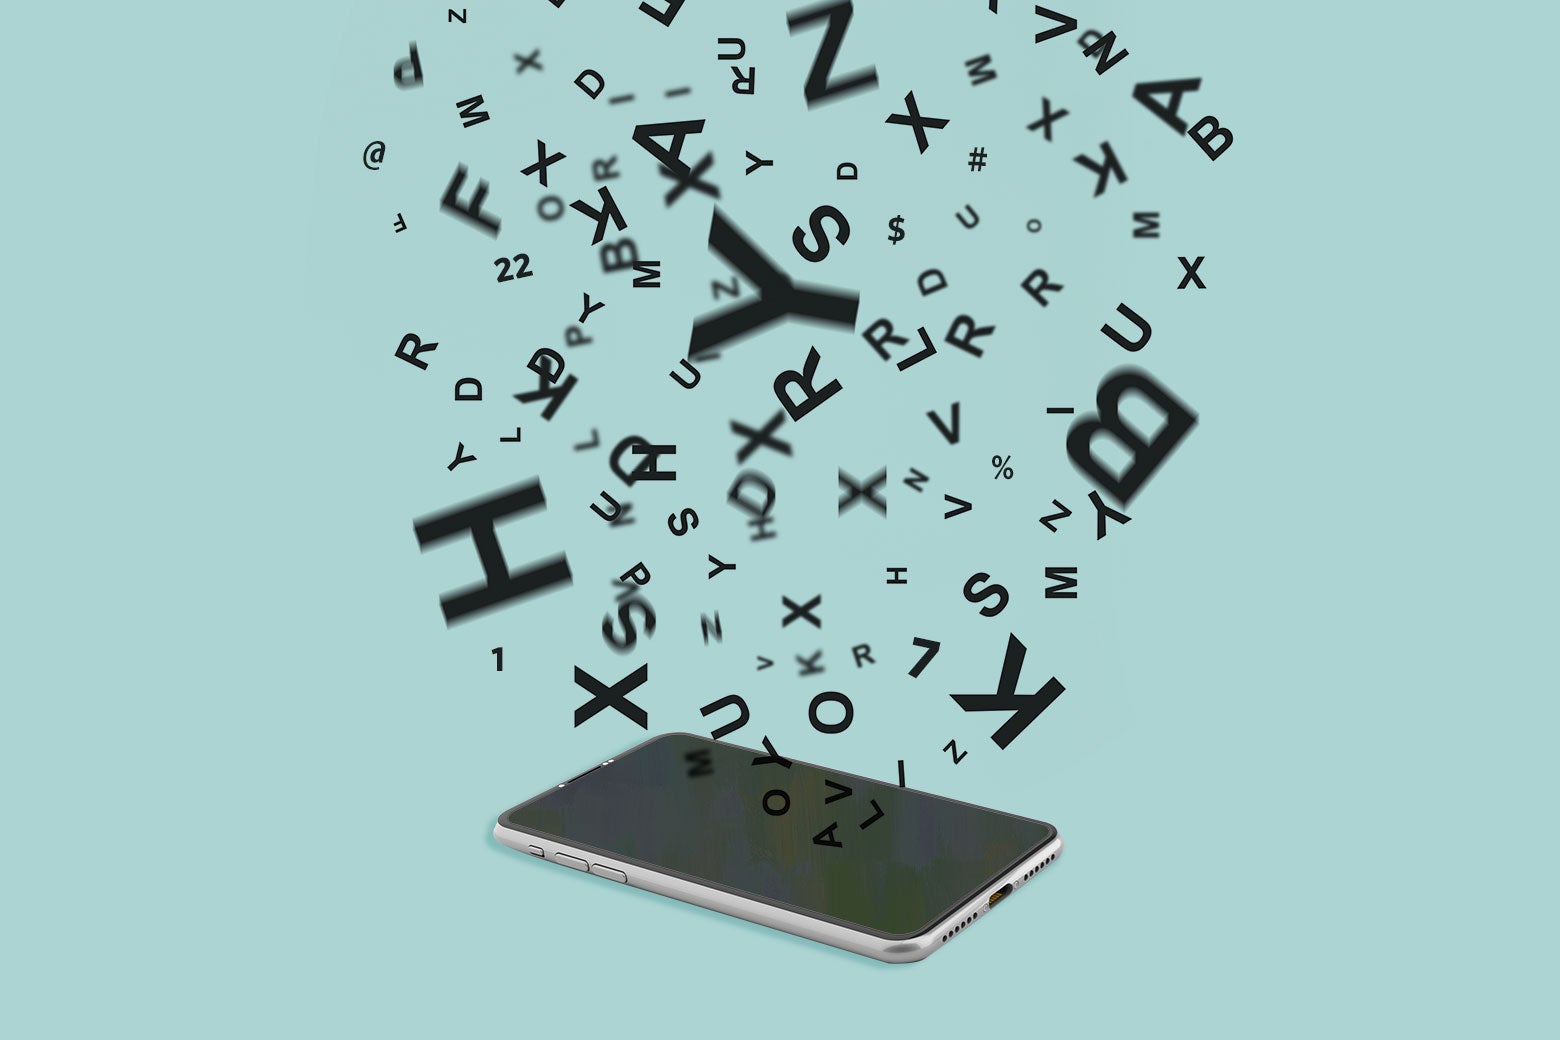 Scattered letters rain down, or out of, a smartphone.